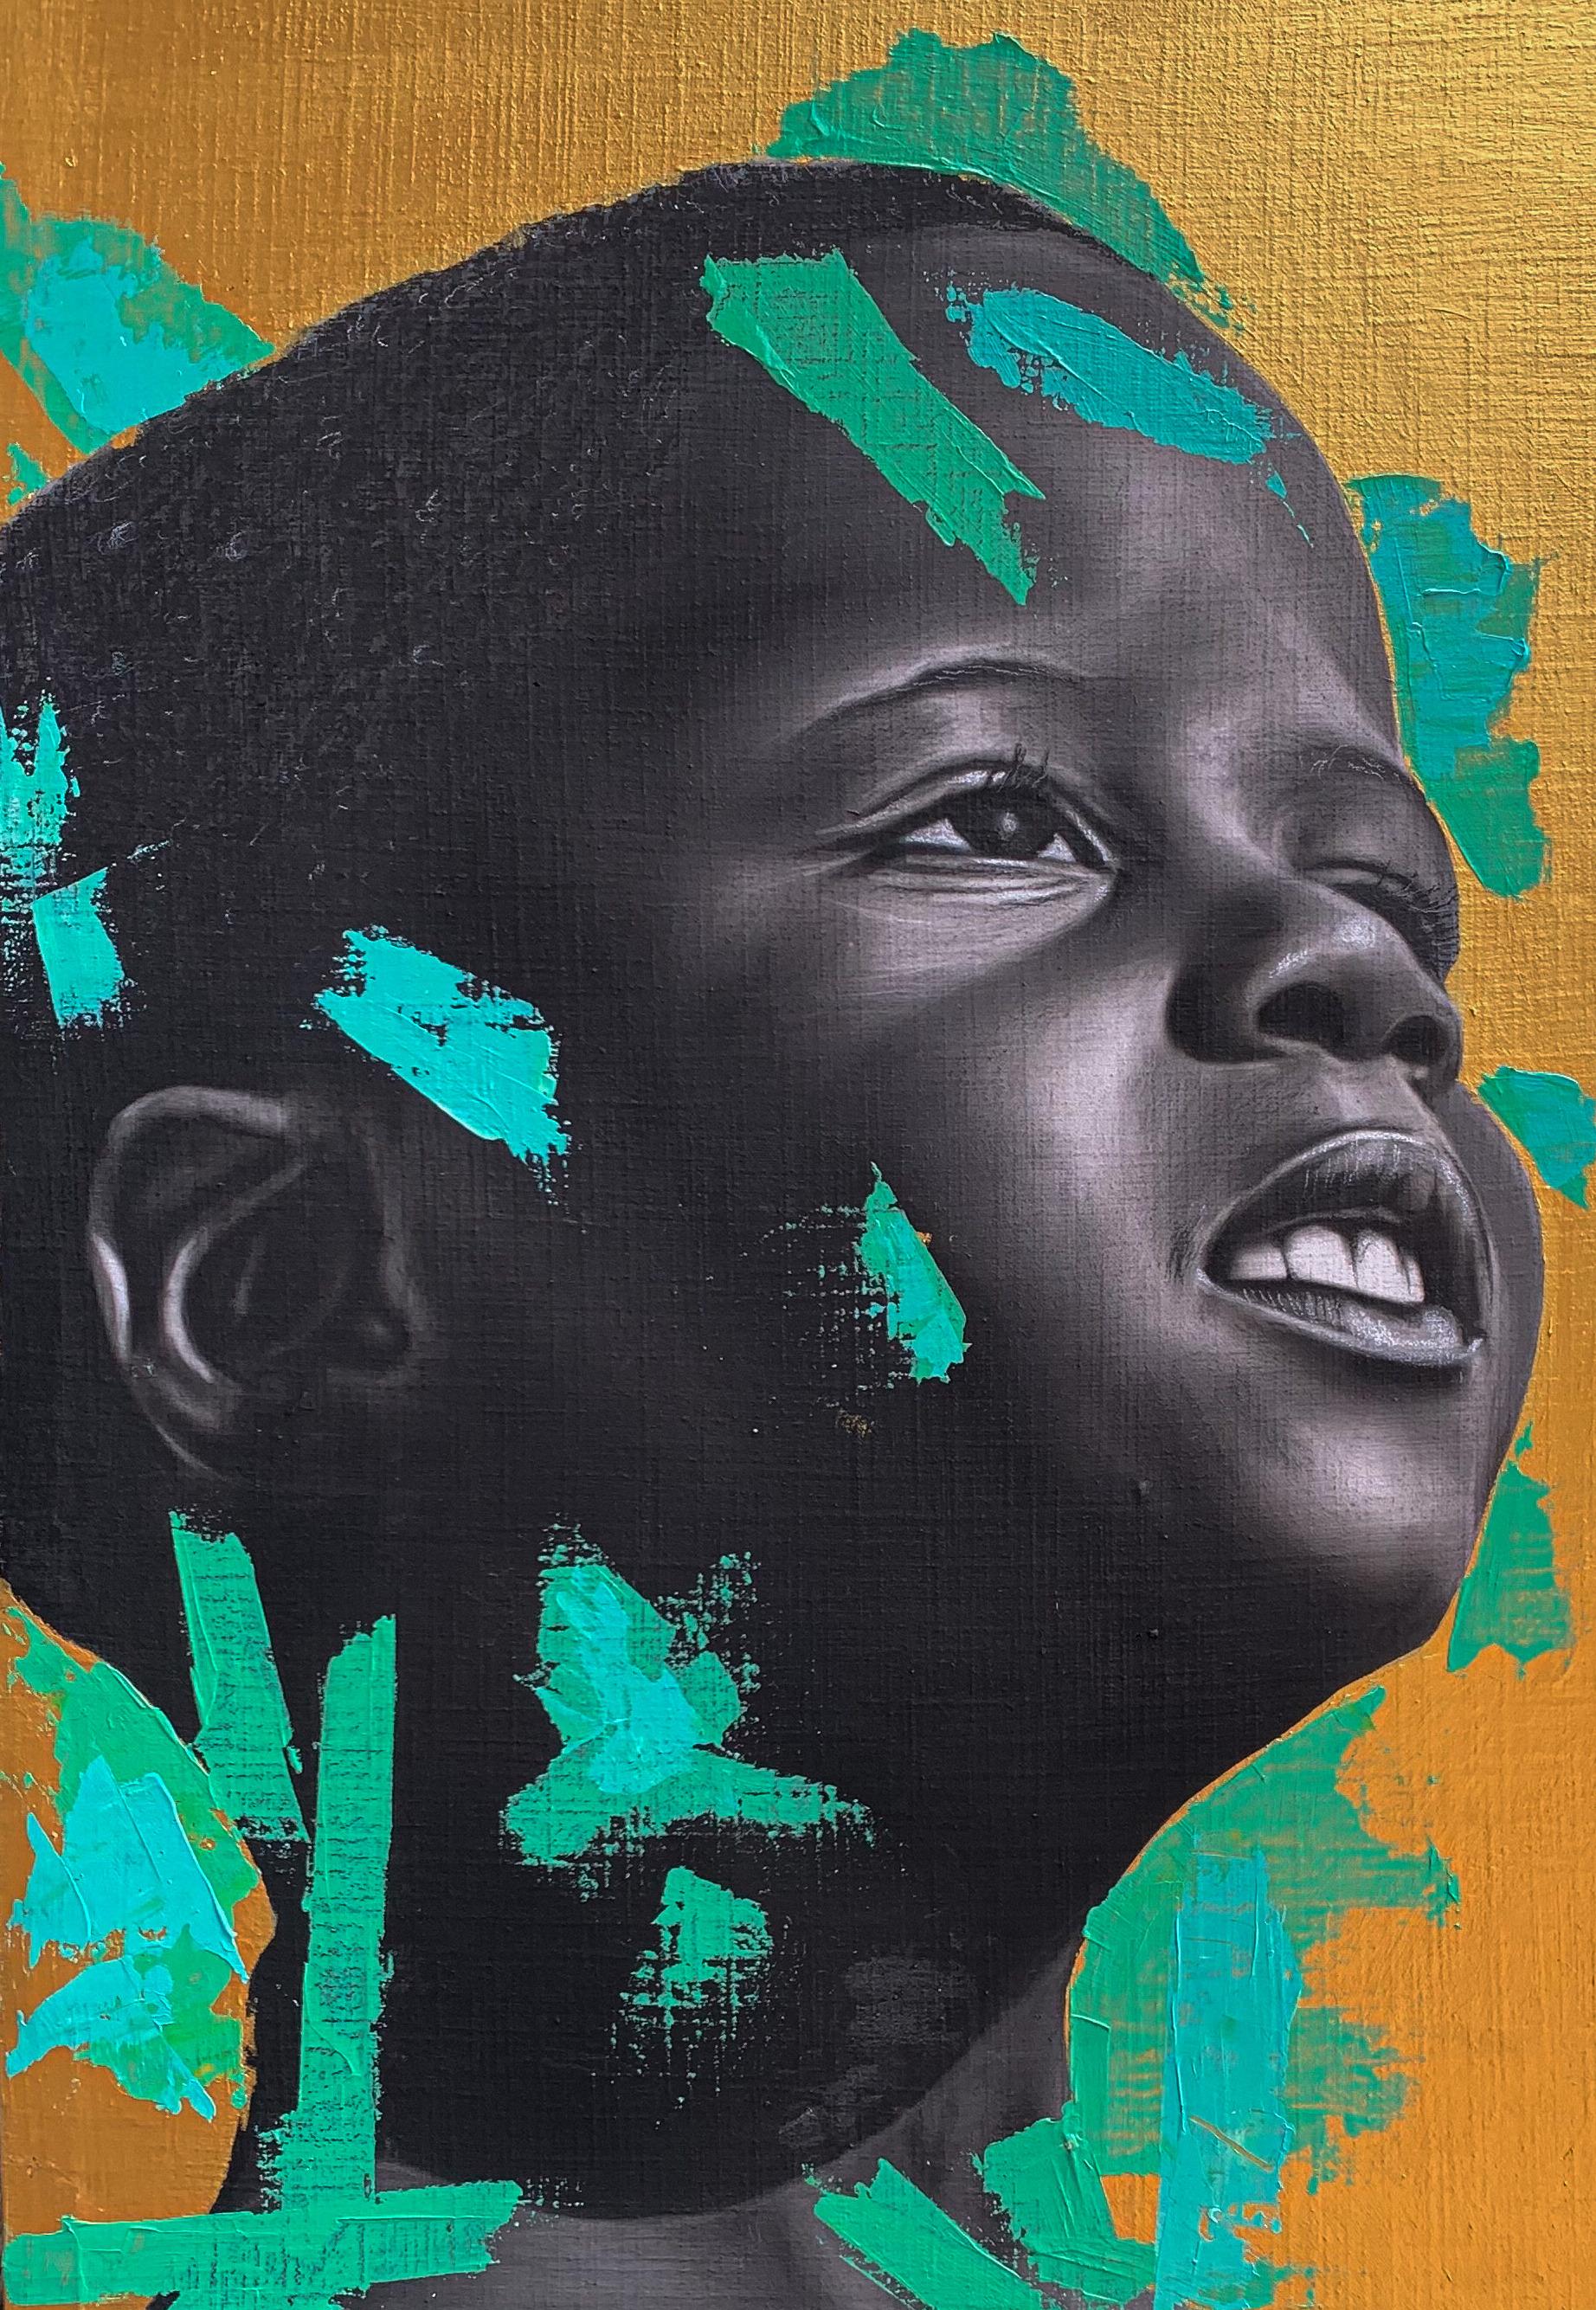 Future ambitions Wowed  - Contemporary Painting by Eyitayo Alagbe 